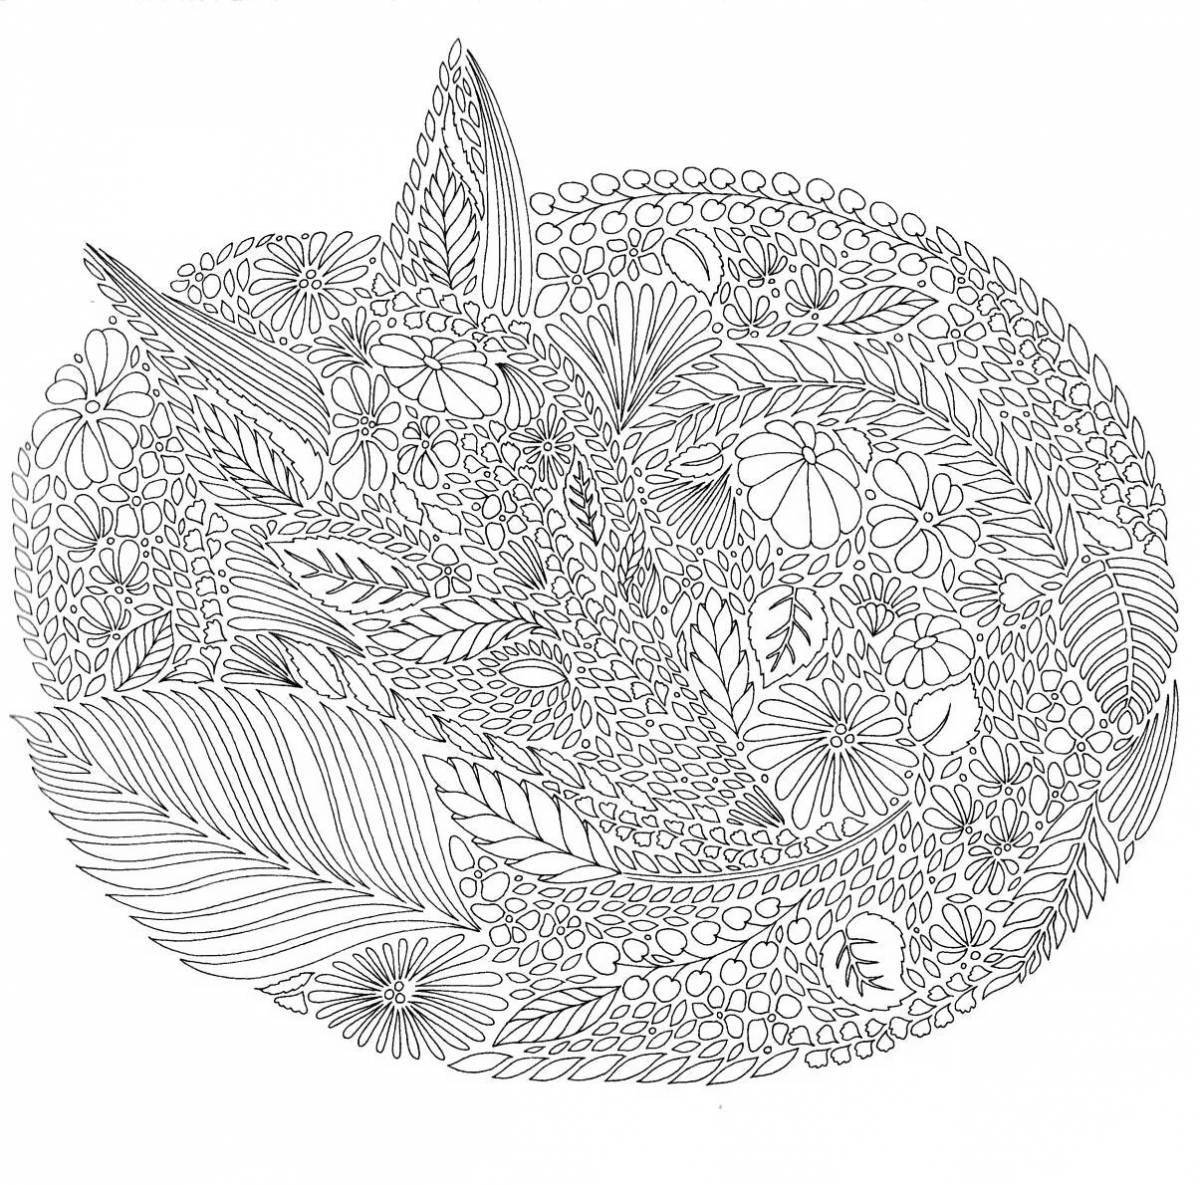 Delightful fox coloring book for adults